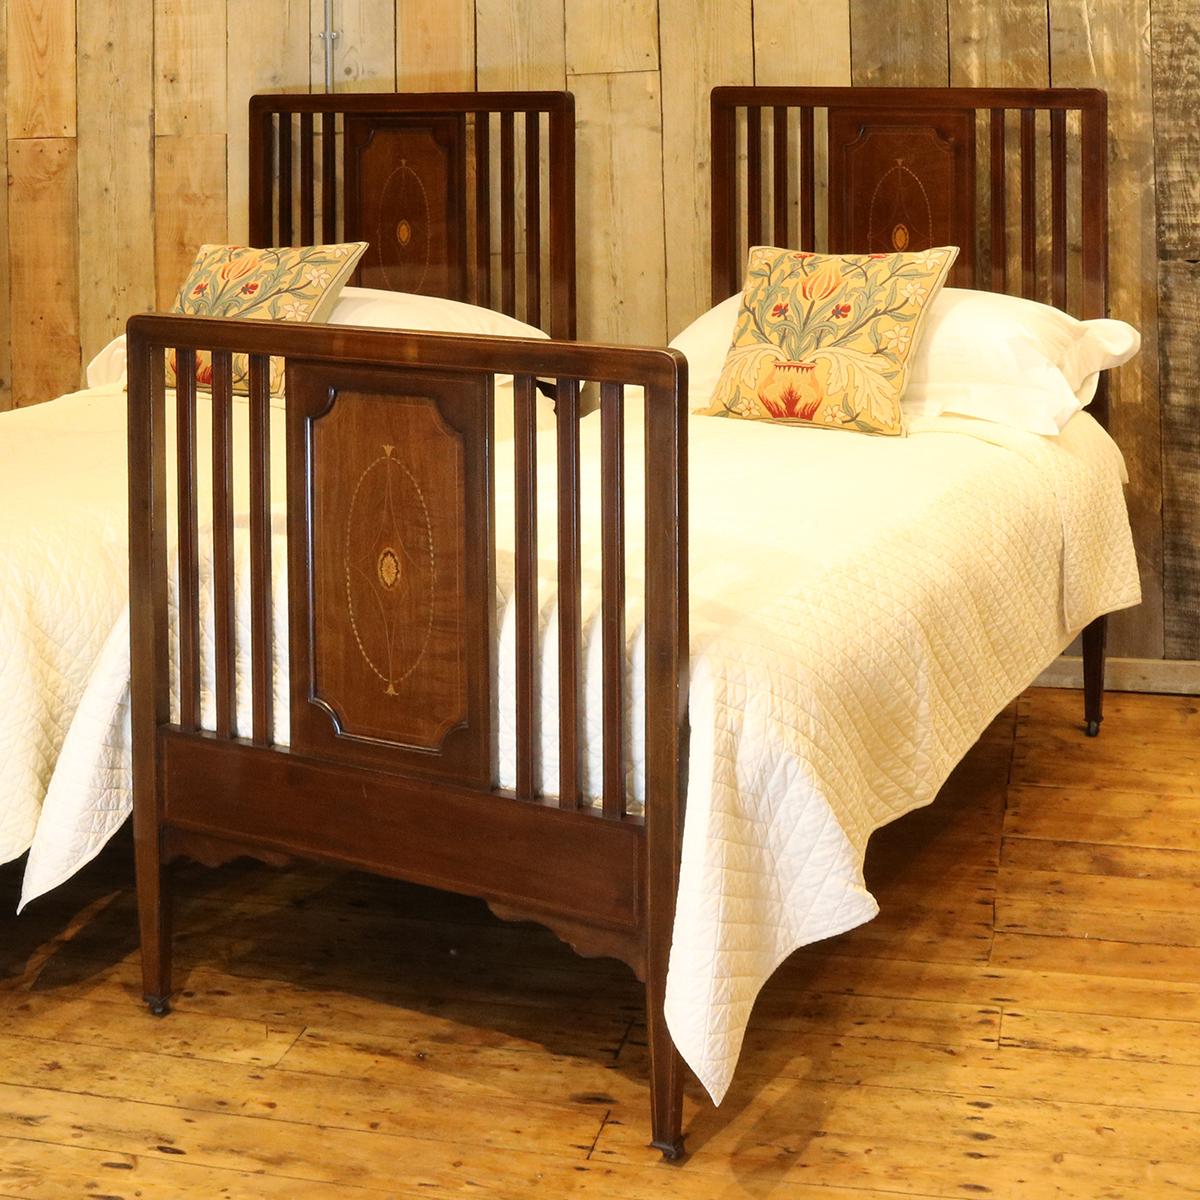 Matching pair of mahogany Edwardian beds with inlaid panels.

These beds accept 3ft wide (36 inches) bases and mattresses. They can be any length required (75 inches, 78 inches or more) and can Stand together to form an extra wide bed if